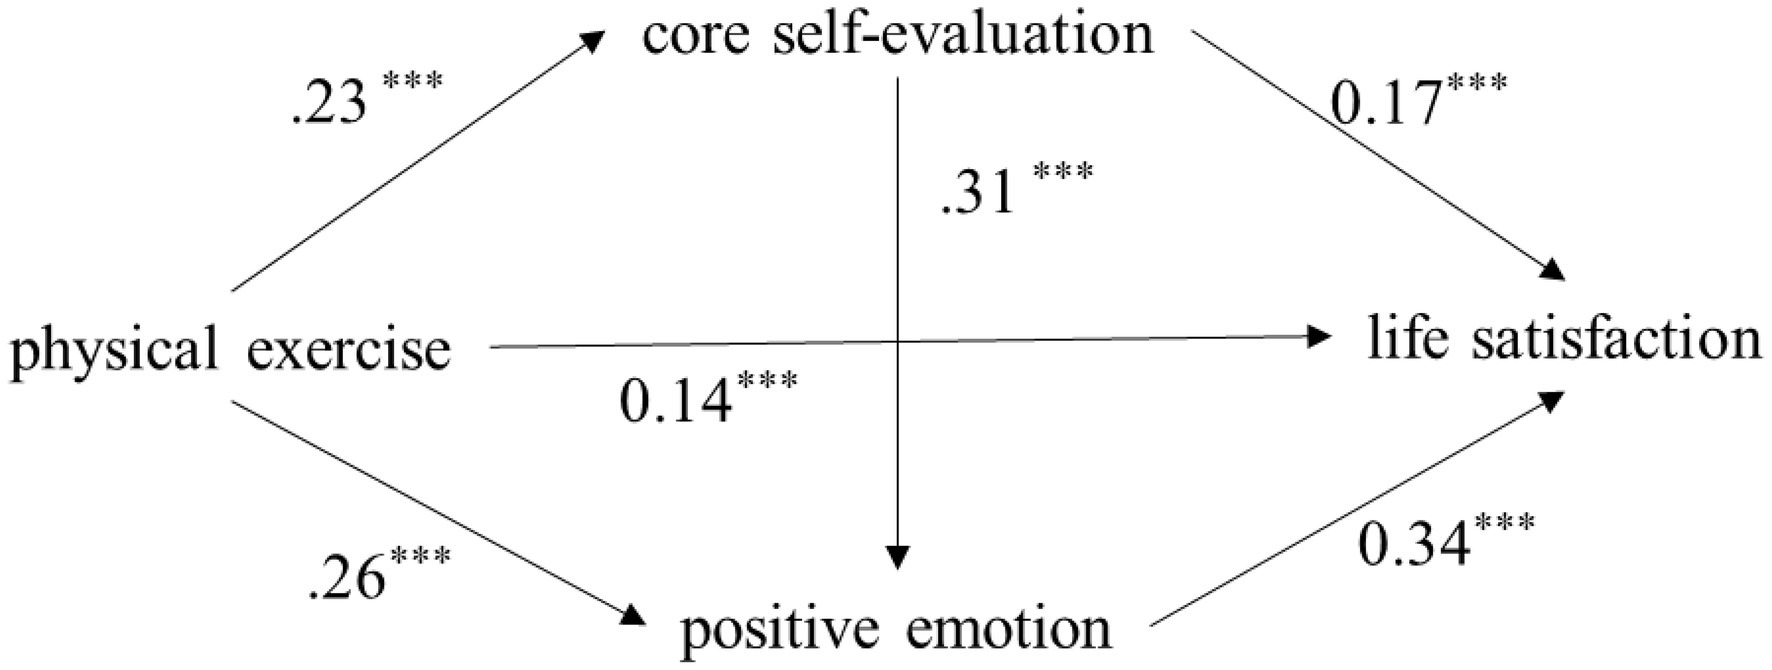 Frontiers The Influence of Chinese College Students Physical Exercise on Life Satisfaction The Chain Mediation Effect of Core Self-evaluation and Positive Emotion